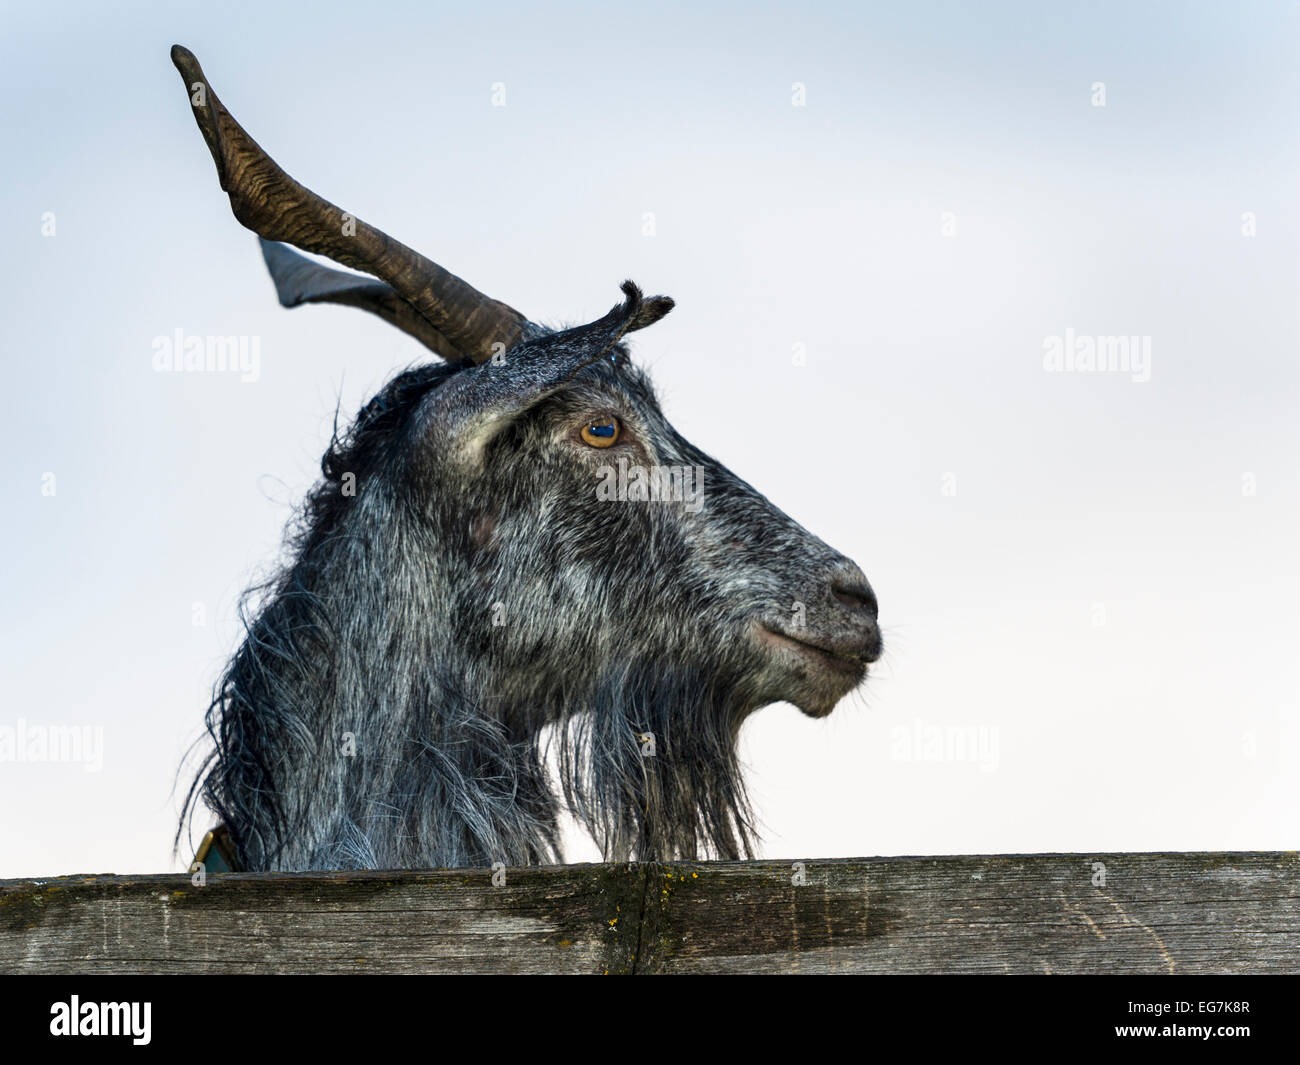 Male goat closeup portrait, looking over a wooden plank, with backward curving horns and beard. Stock Photo